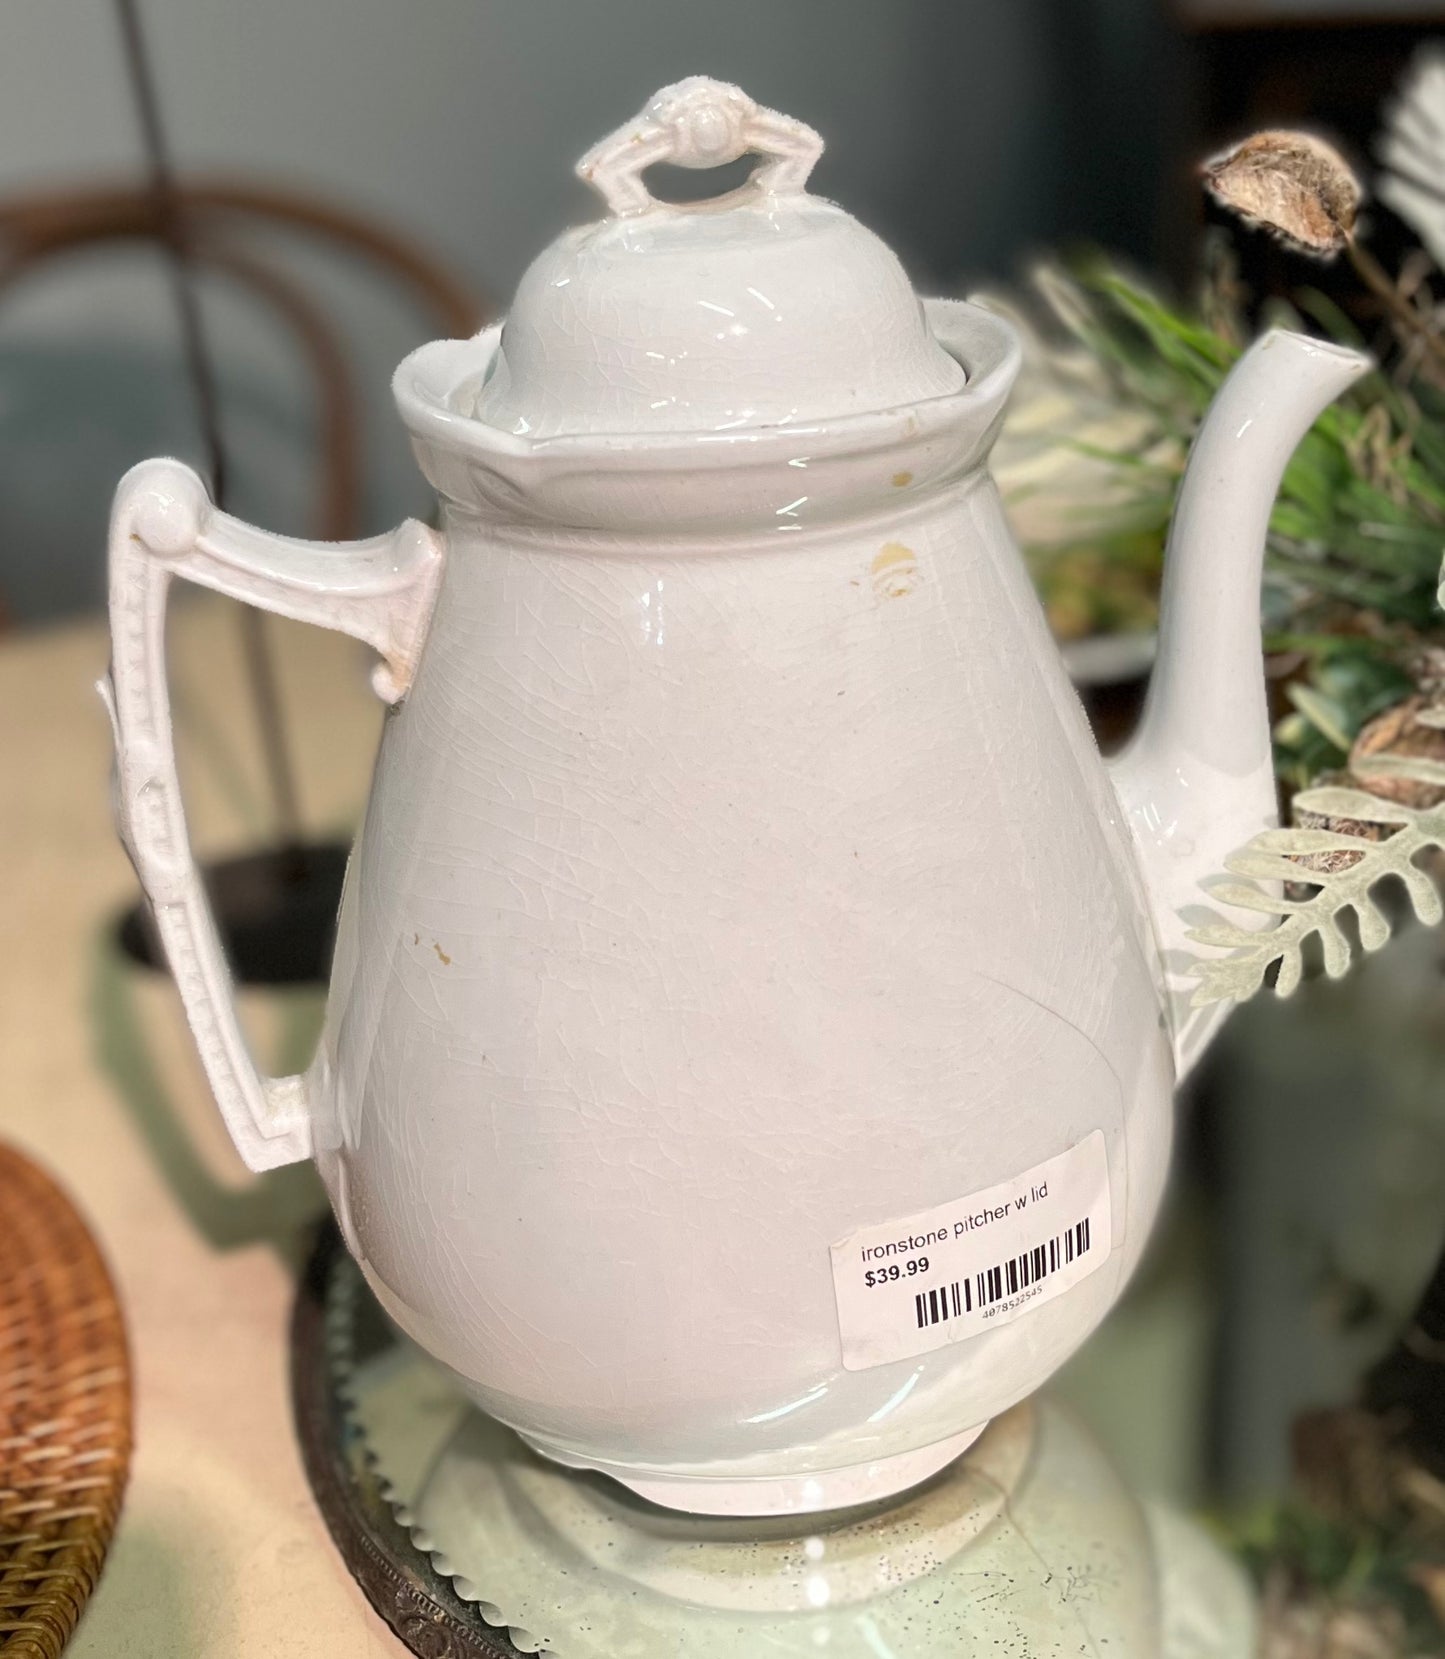 Ironstone Pitcher with Lid